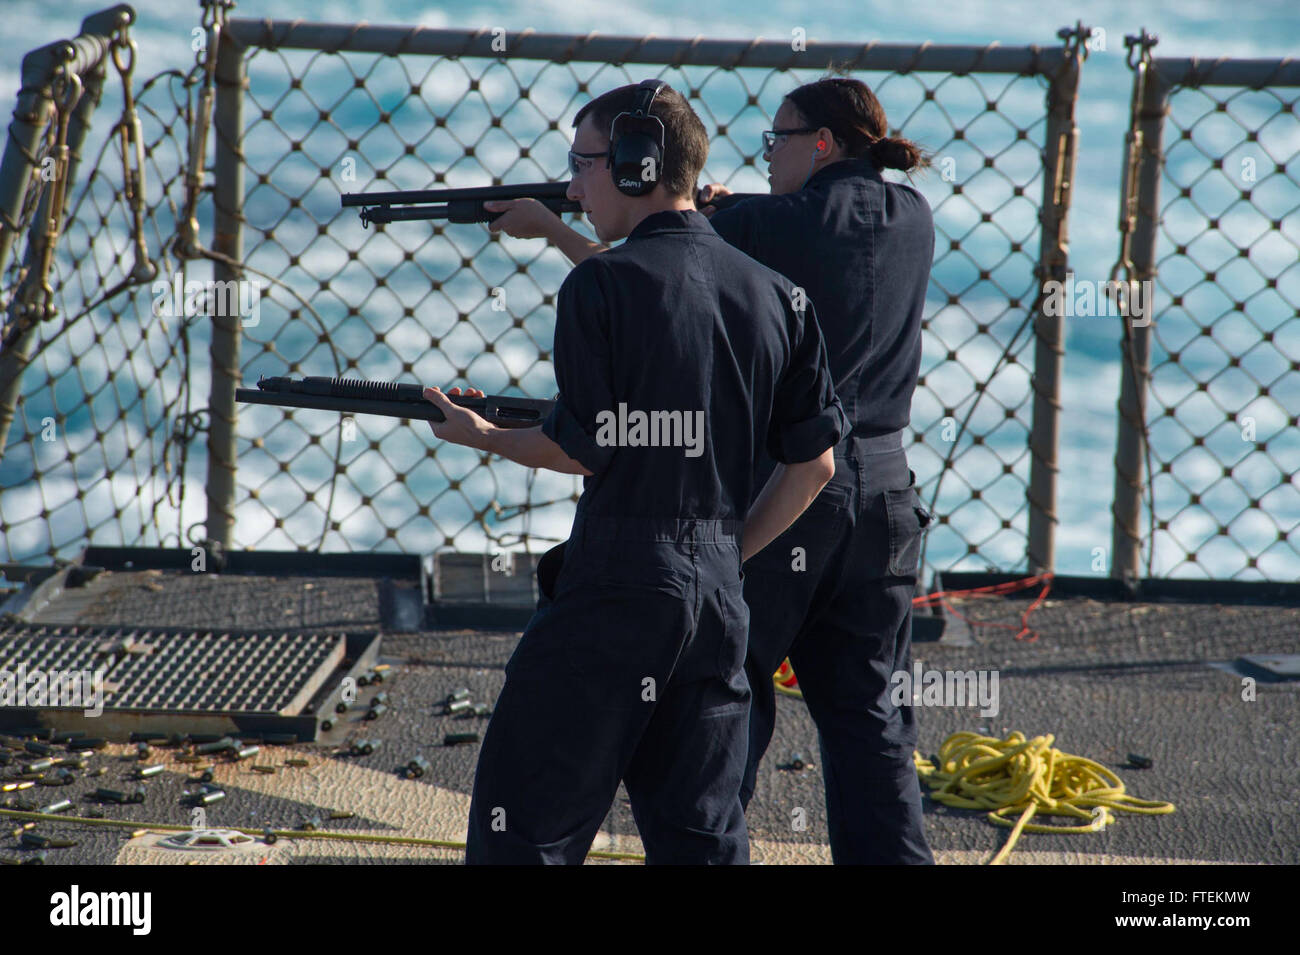 150203-N-TC720-471 MEDITERRANEAN SEA (Feb. 3, 2015) -Lt. j.g Franklyn Dahlberg, forward, and Gunner's Mate 2nd Class Diana Fischer fire M500 shotguns during a live fire training exercise aboard USS Cole (DDG 67) Feb. 3, 2015. Cole, an Arleigh Burke-class guided-missile destroyer, homeported in Norfolk, is conducting naval operations in the U.S. 6th Fleet area of operations in support of U.S. national security interests in Europe. (U.S. Navy photo by Mass Communication Specialist 3rd Class Mat Murch/Released) Stock Photo